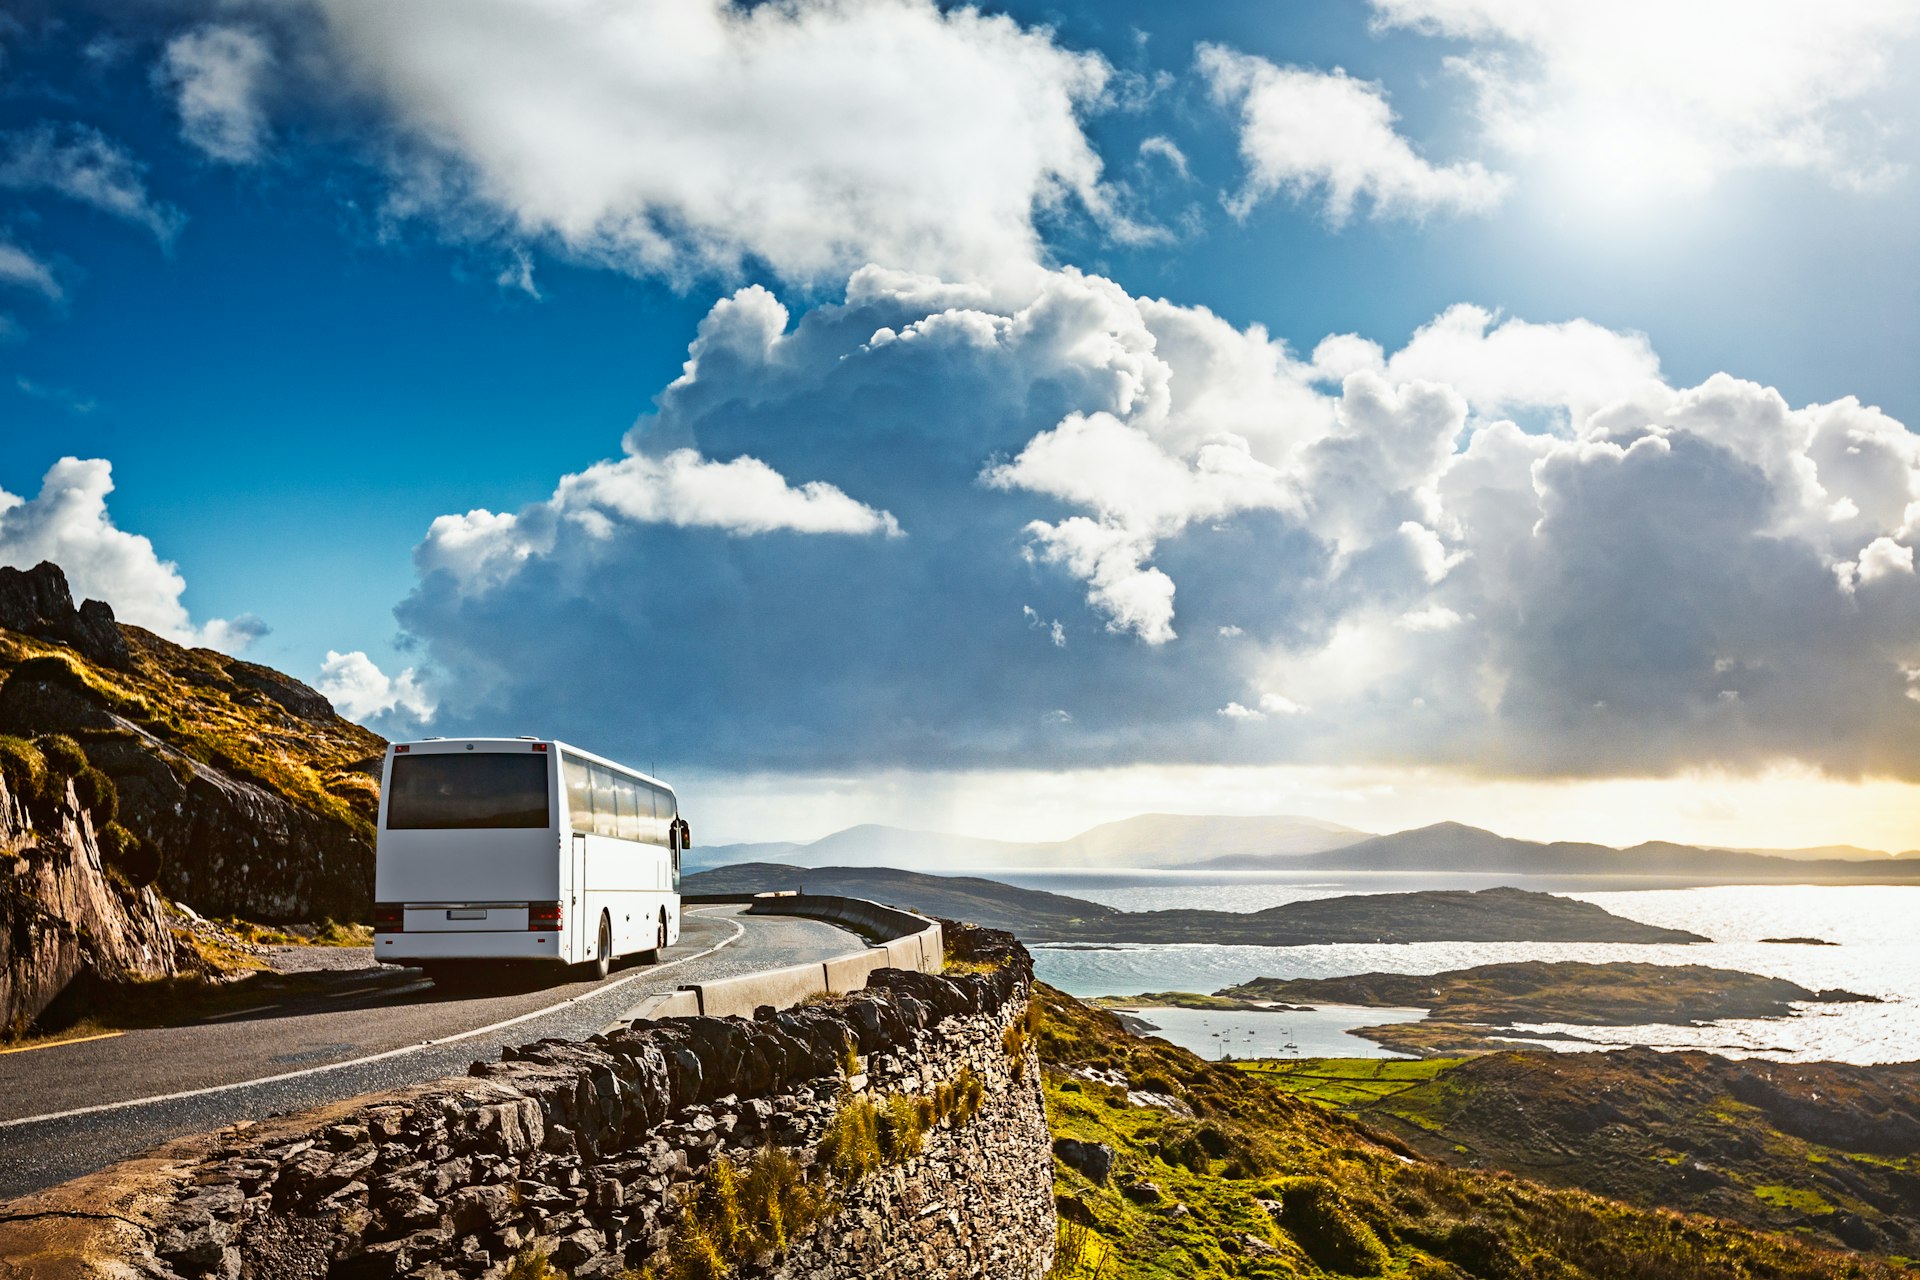 A bus on a mountain road, Ring of Kerry, Ireland